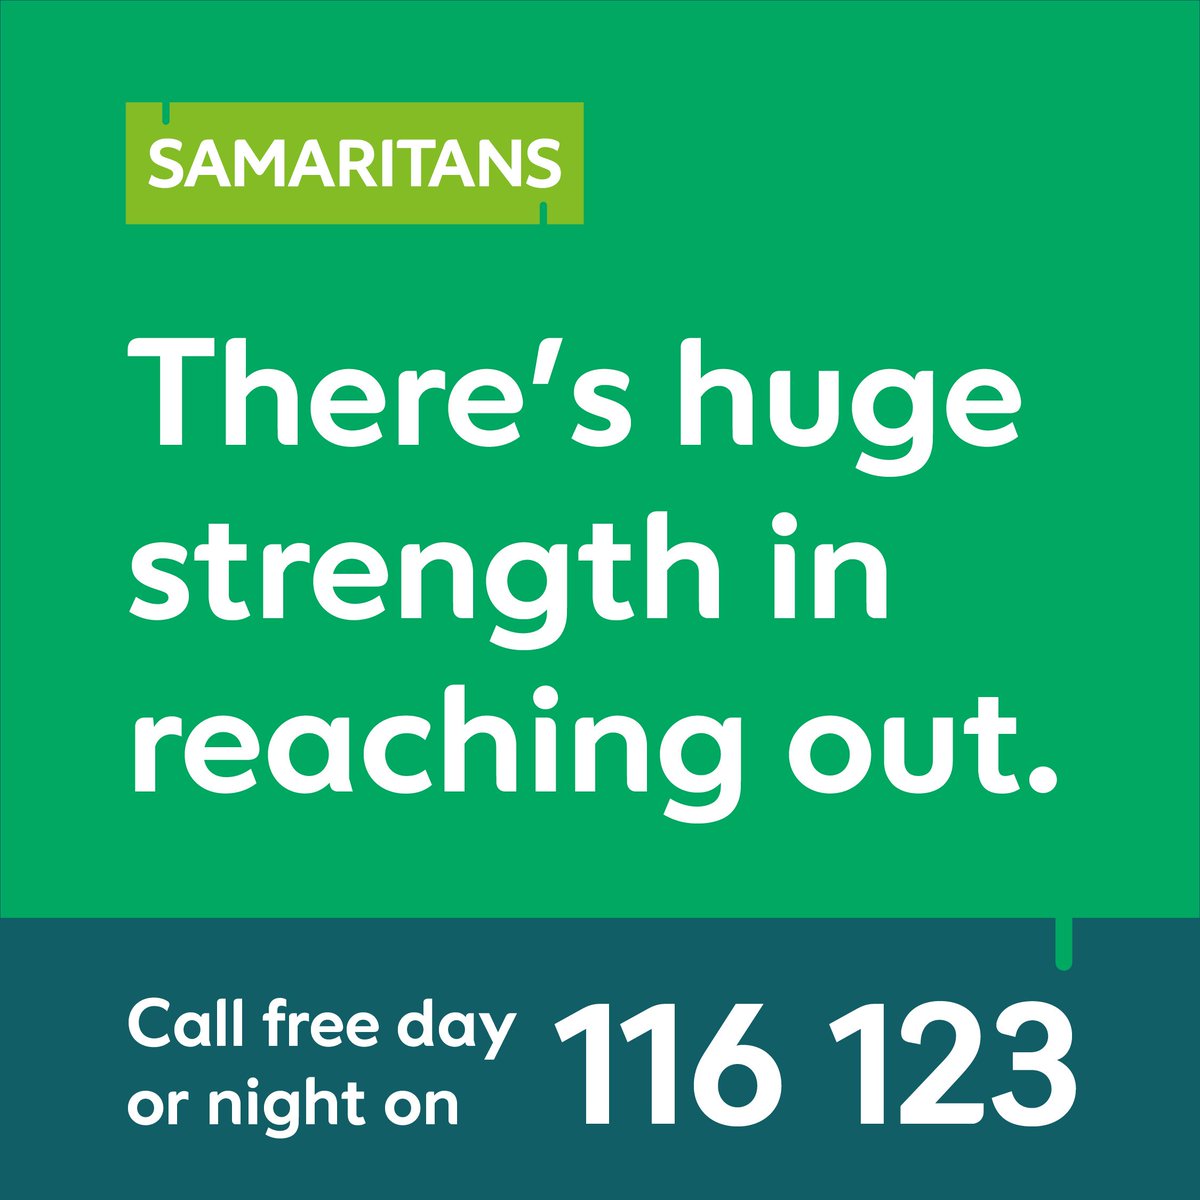 You don't have to face anything alone. We're here 24/7 if you need us 💚